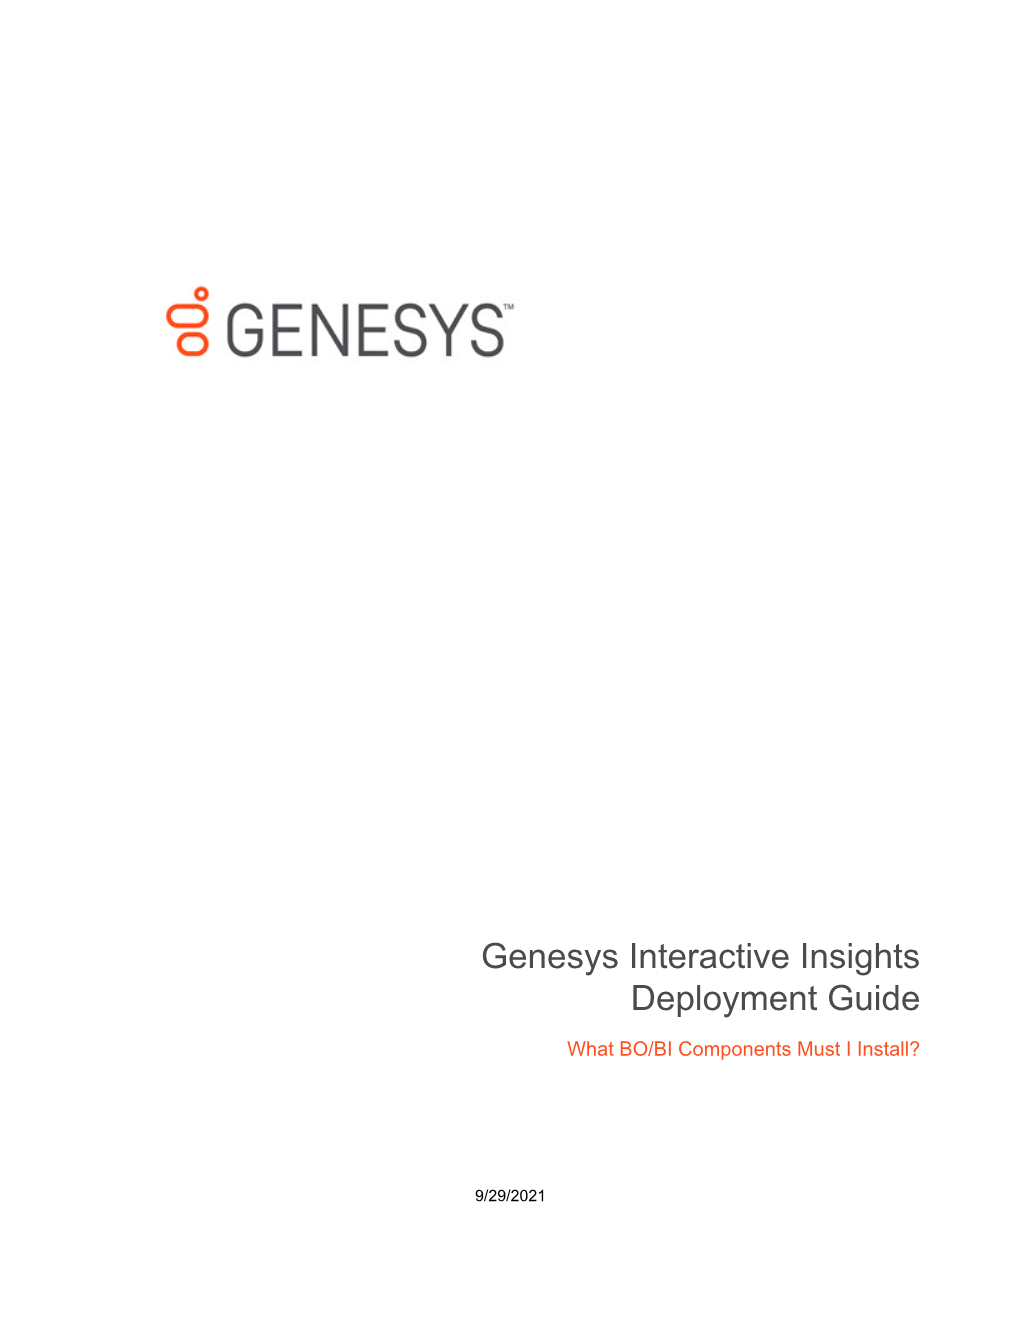 Genesys Interactive Insights Deployment Guide